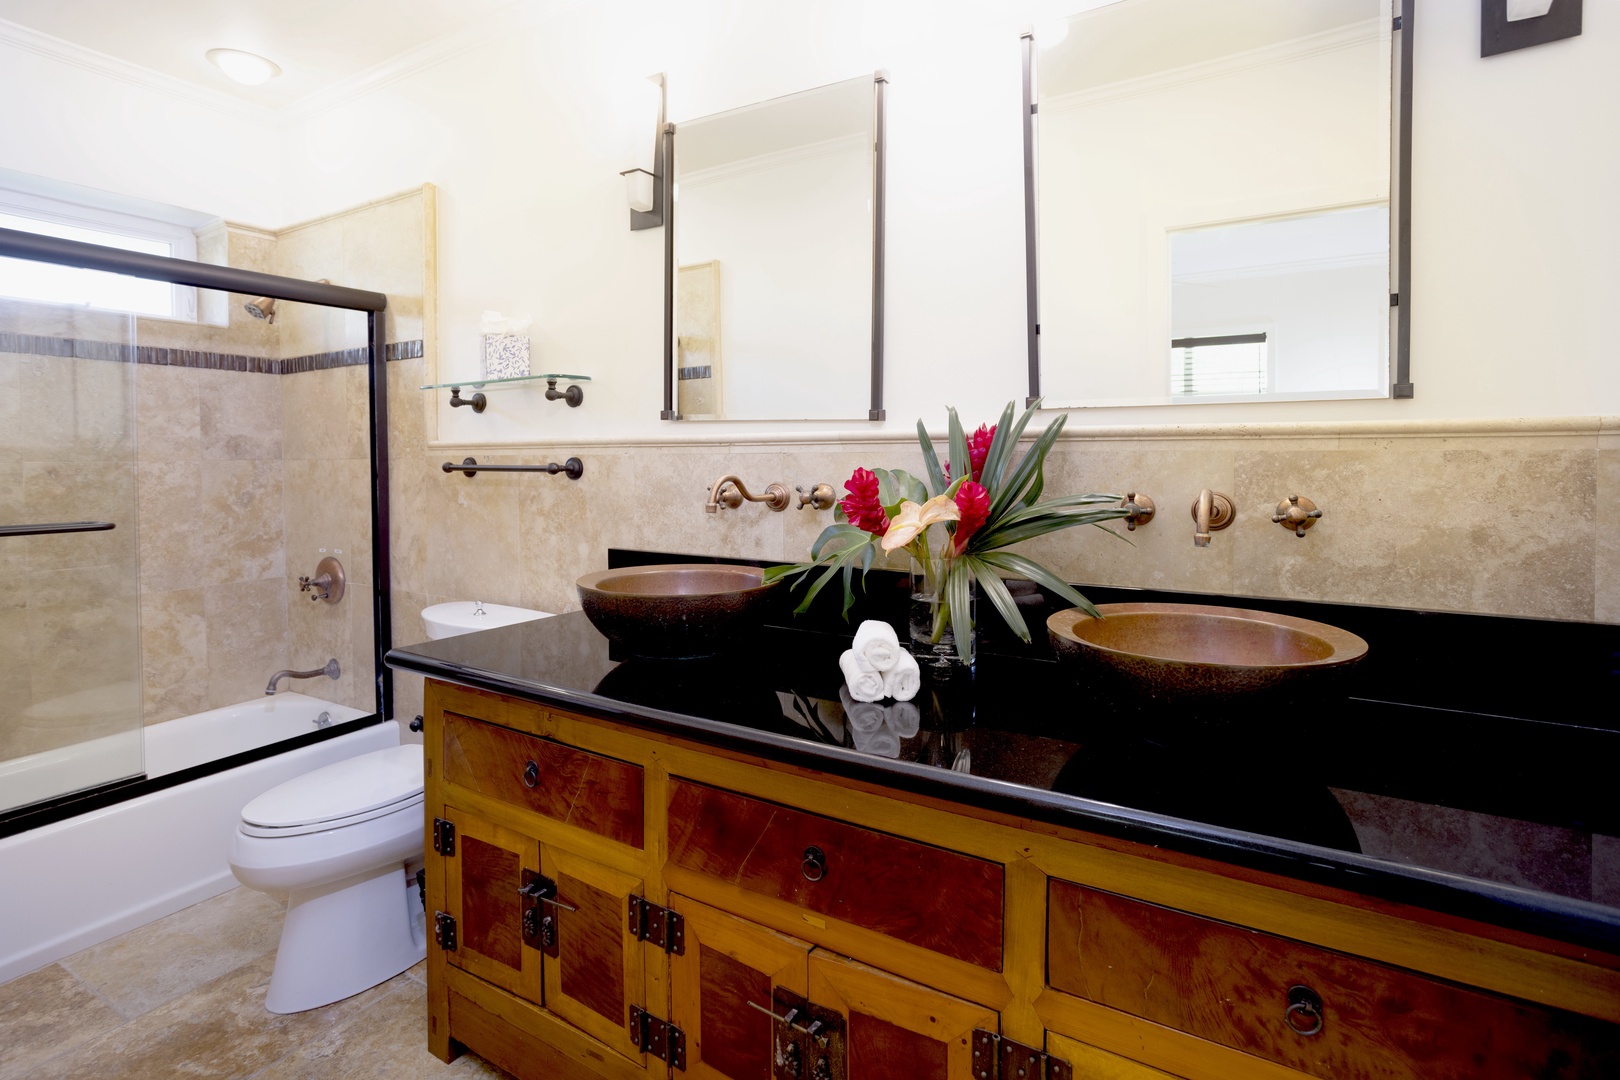 Kailua Vacation Rentals, Mokulua Seaside - Ensuite bathroom with dual sinks and a shower/tub combo